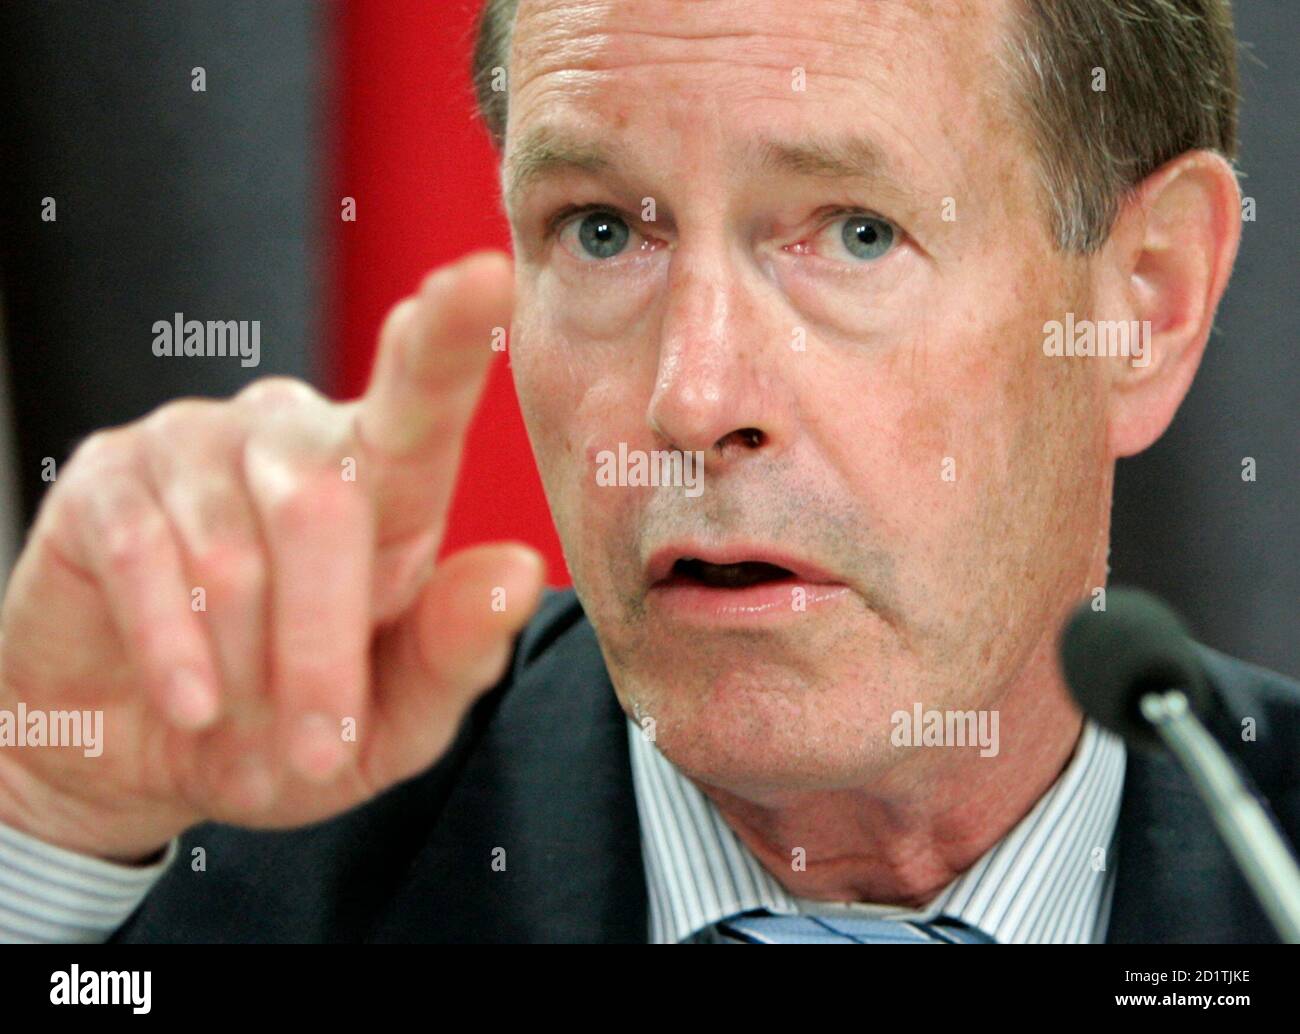 Bank of Canada Governor David Dodge speaks during a news conference upon the release of the Monetary Policy Report in Ottawa July 12, 2007.        REUTERS/Chris Wattie   (CANADA) Stock Photo